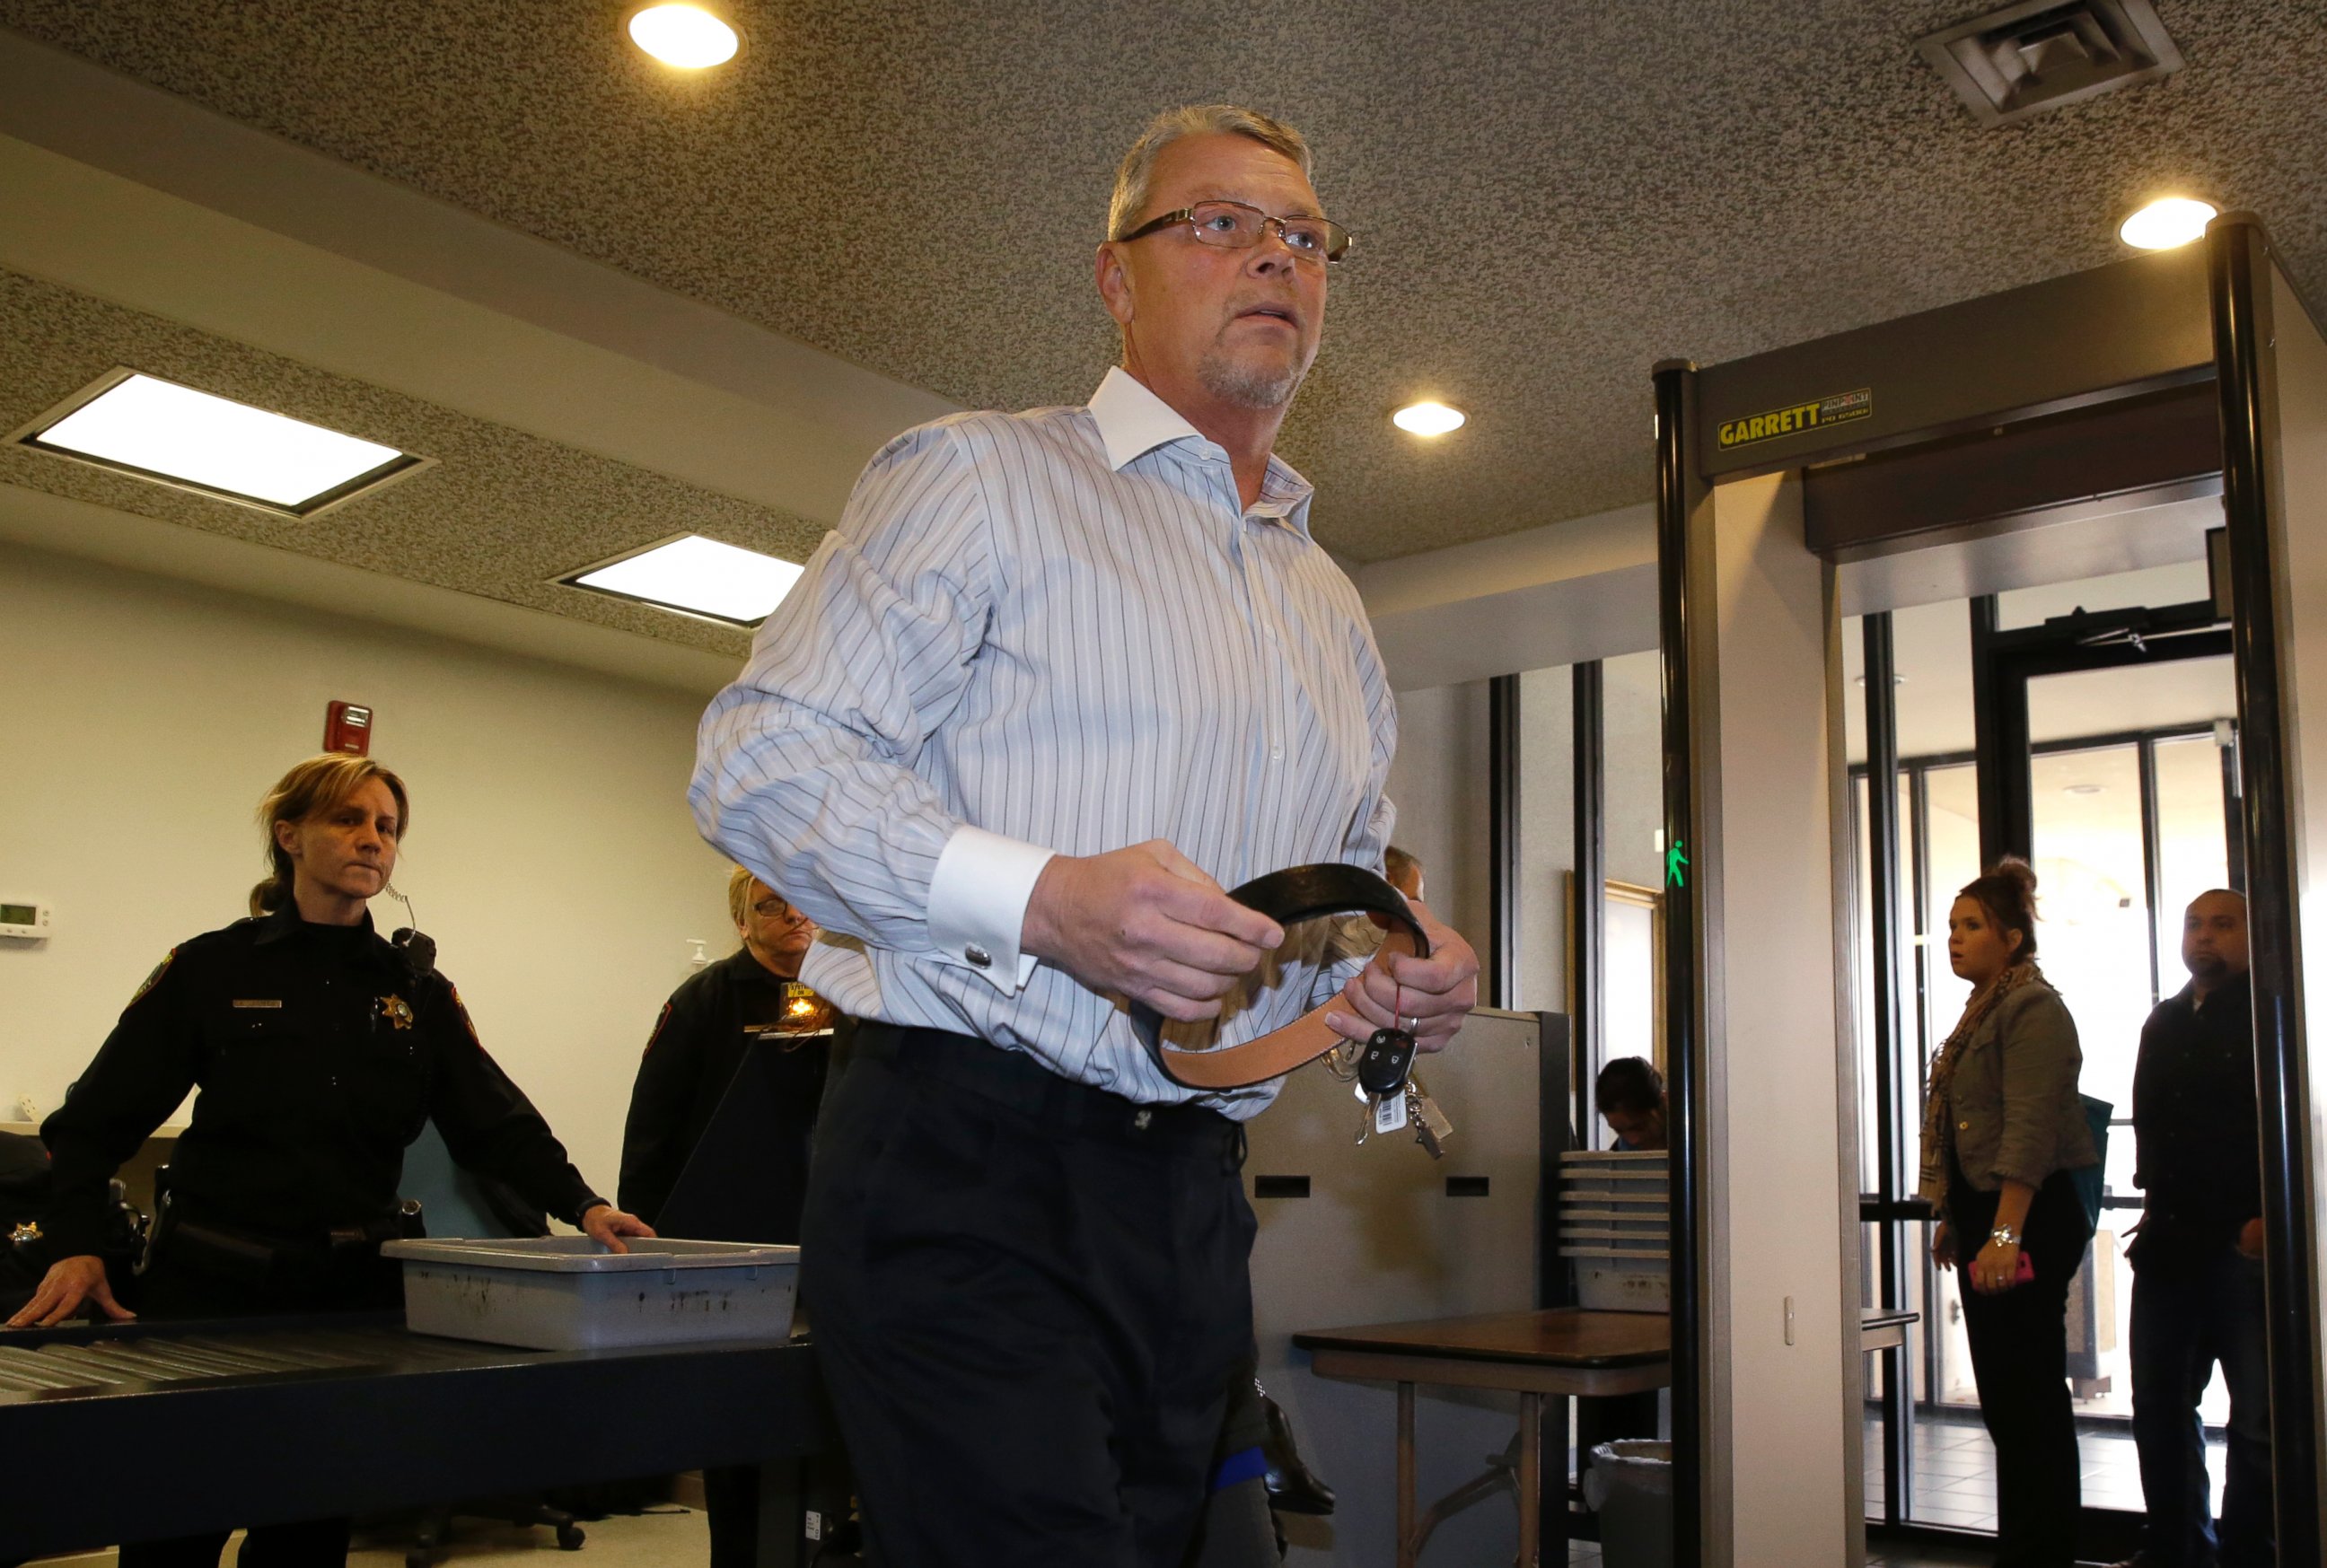 PHOTO: Fred Couch, father of "affluenza" teen Ethan Couch, collects his belt after clearing security as he arrives at juvenile court, Feb. 5, 2014, in Fort Worth, Texas.